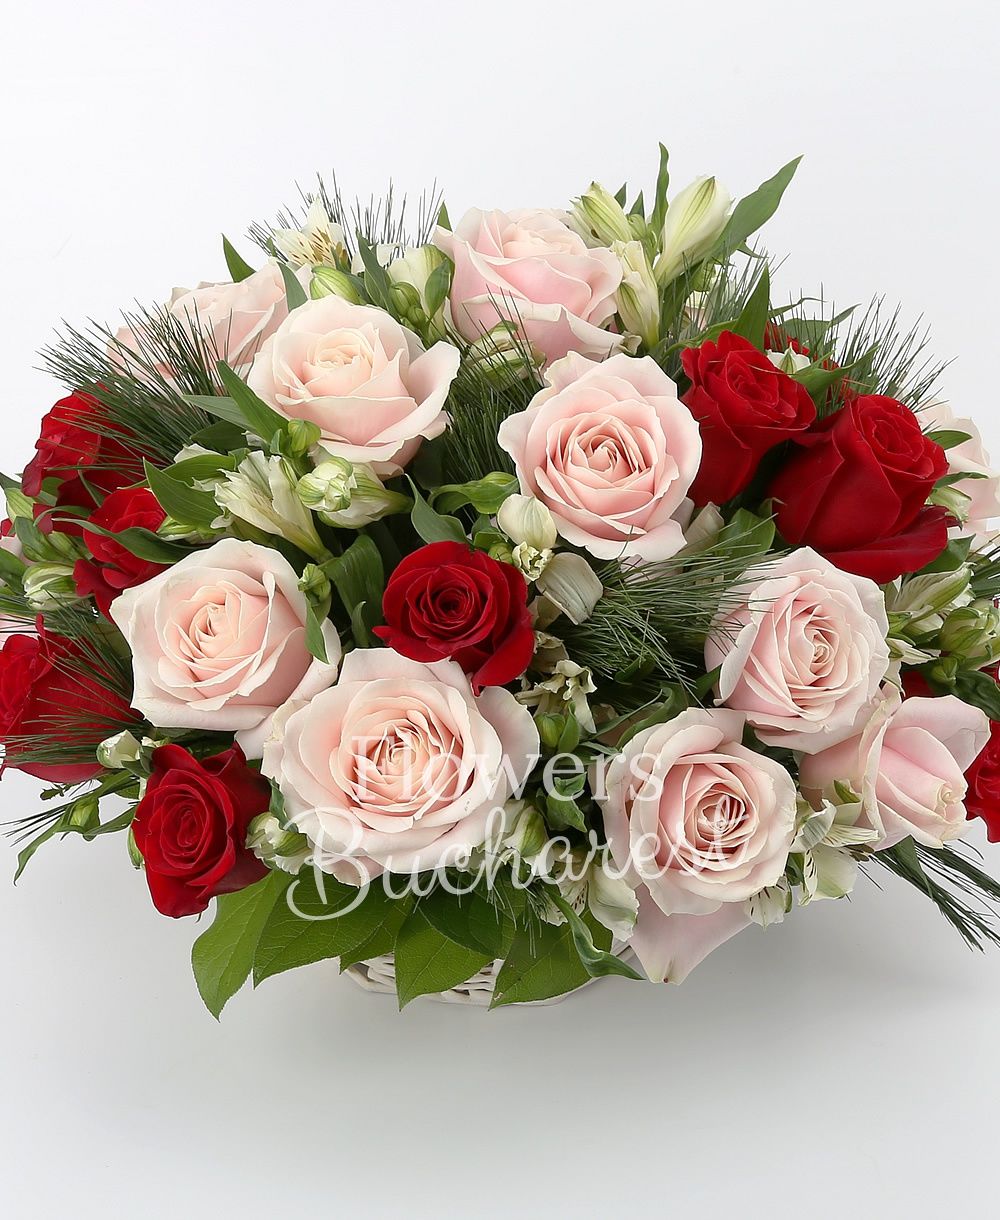 11 red roses, 10 pink roses, 6 white alstroemeria, greenery